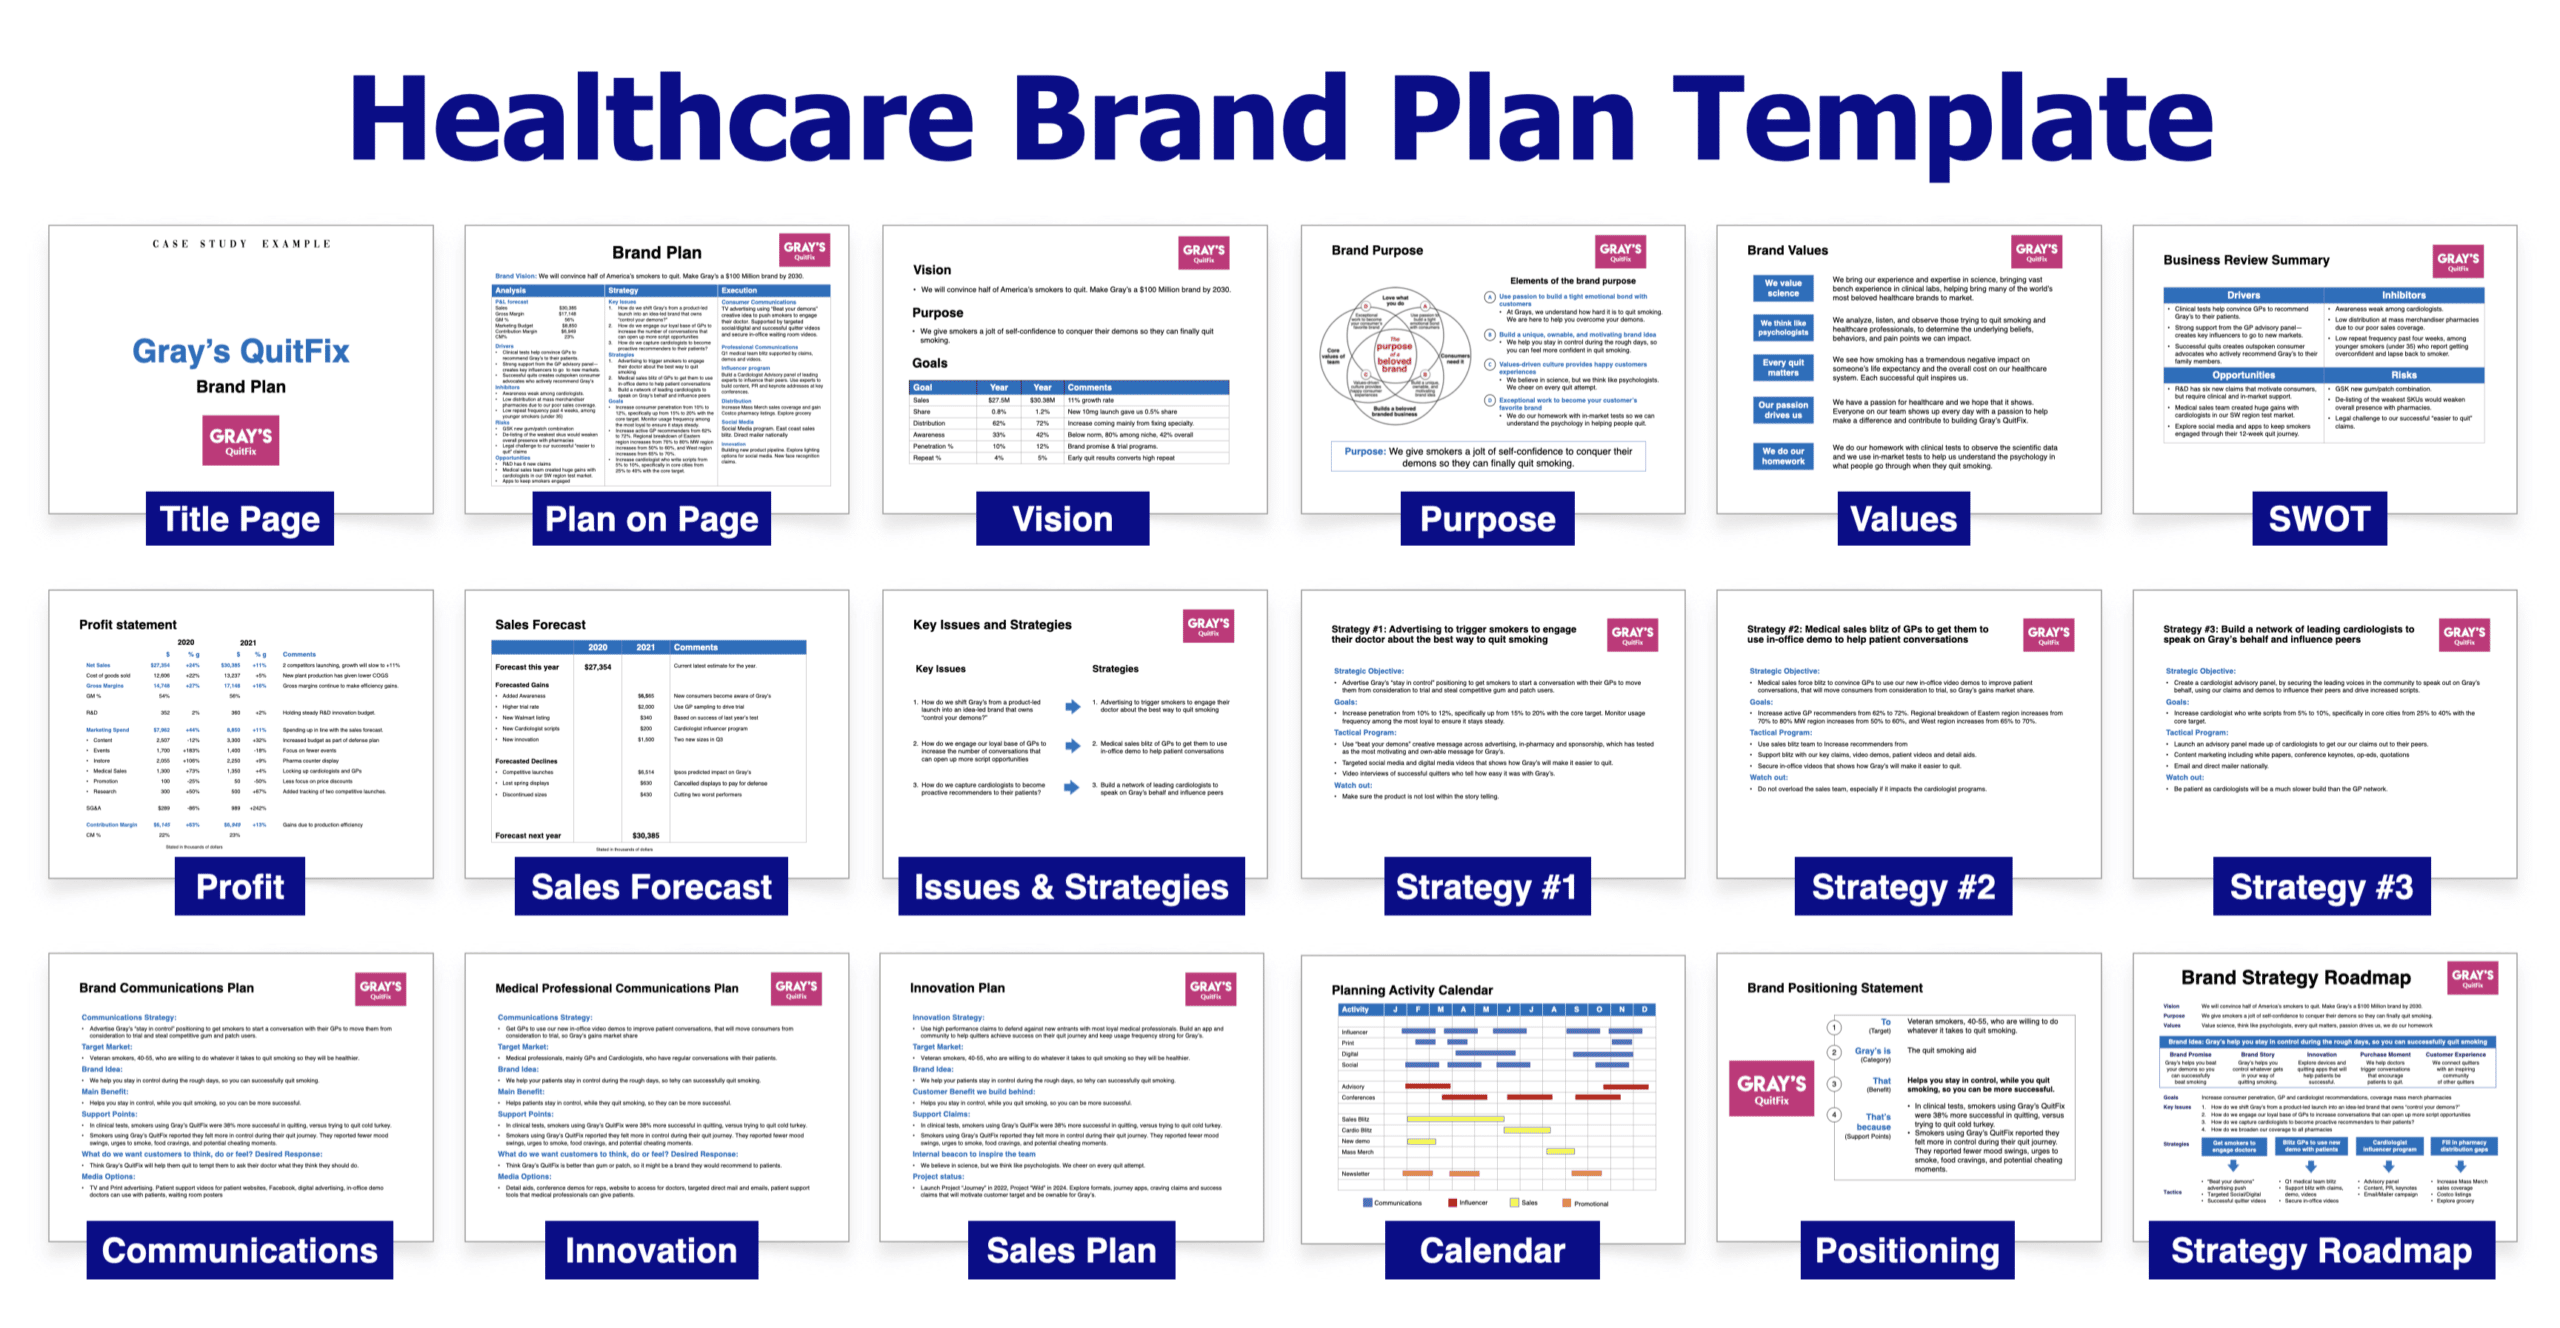 Healthcare Brand Plan template file for the Healthcare Brand Toolkit